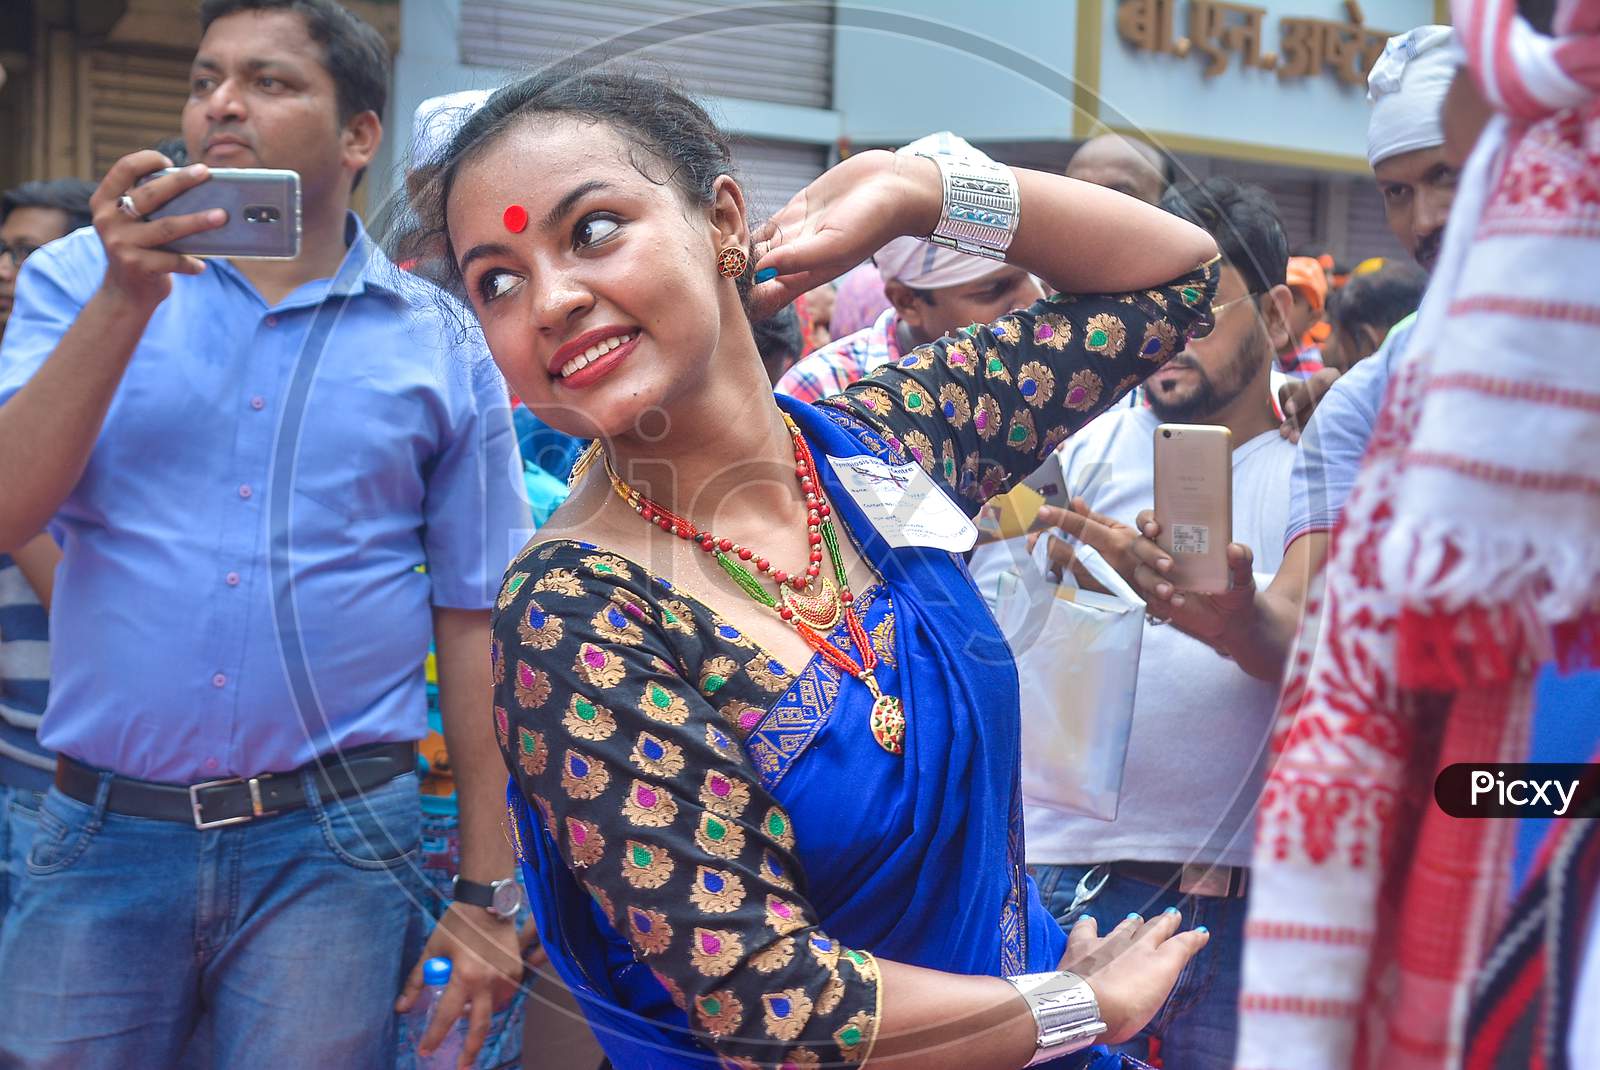 Pune, India - September 4, 2017: Assamese Women Wearing Traditional Saree And Jewellery Doing Folk Dance On The Crowded Streets Of Pune On The Occasion Of Ganpati Visarjan Festival.